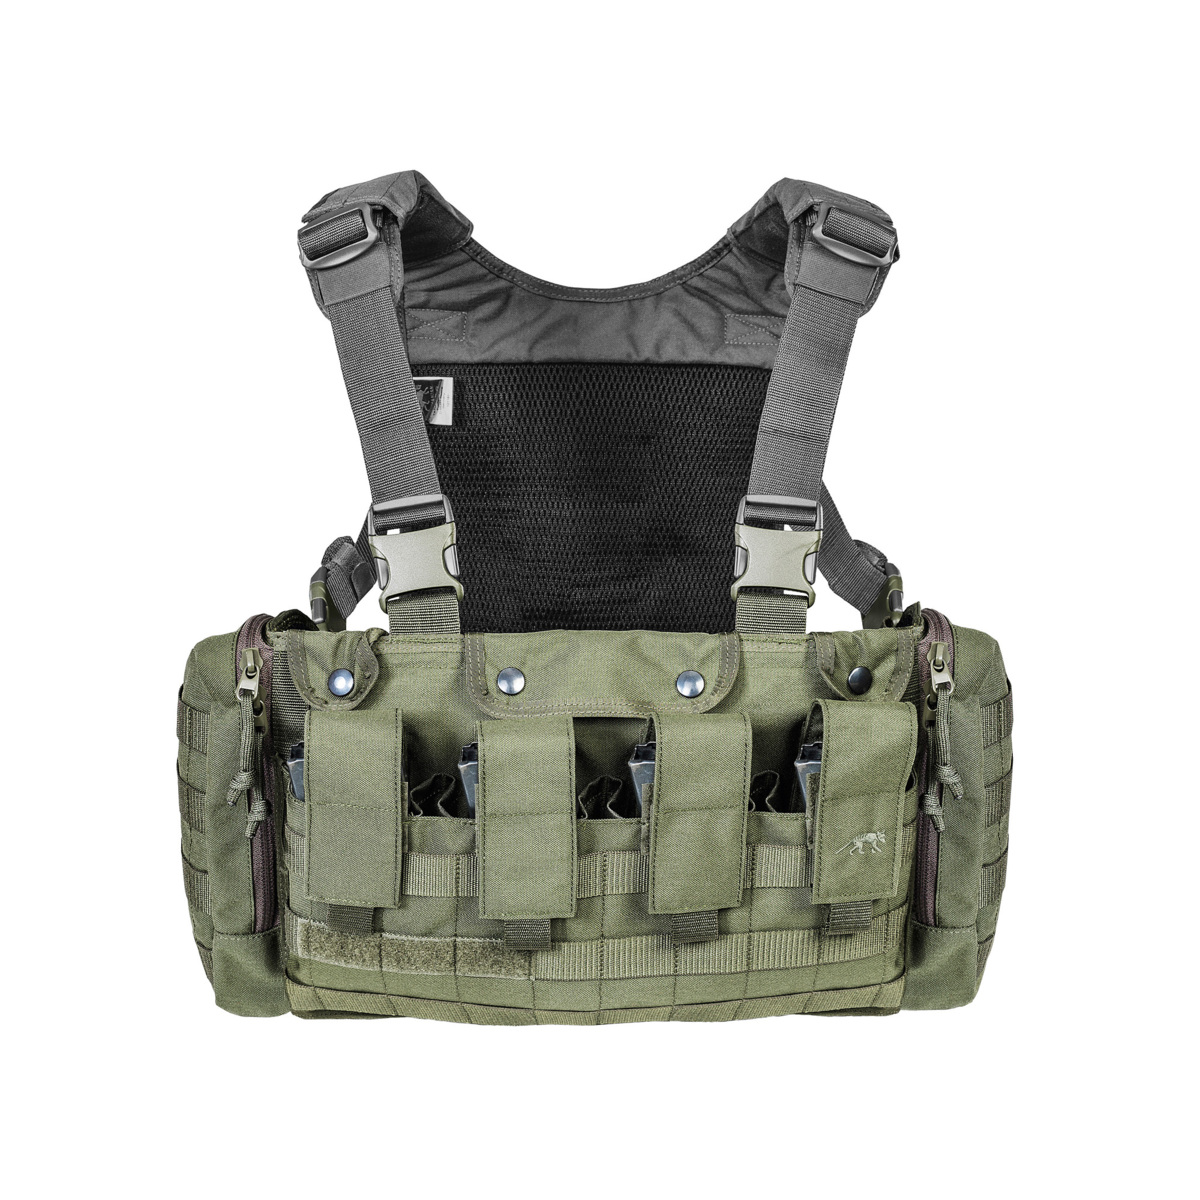 TT Chest Rig MKII - Harness with side pockets